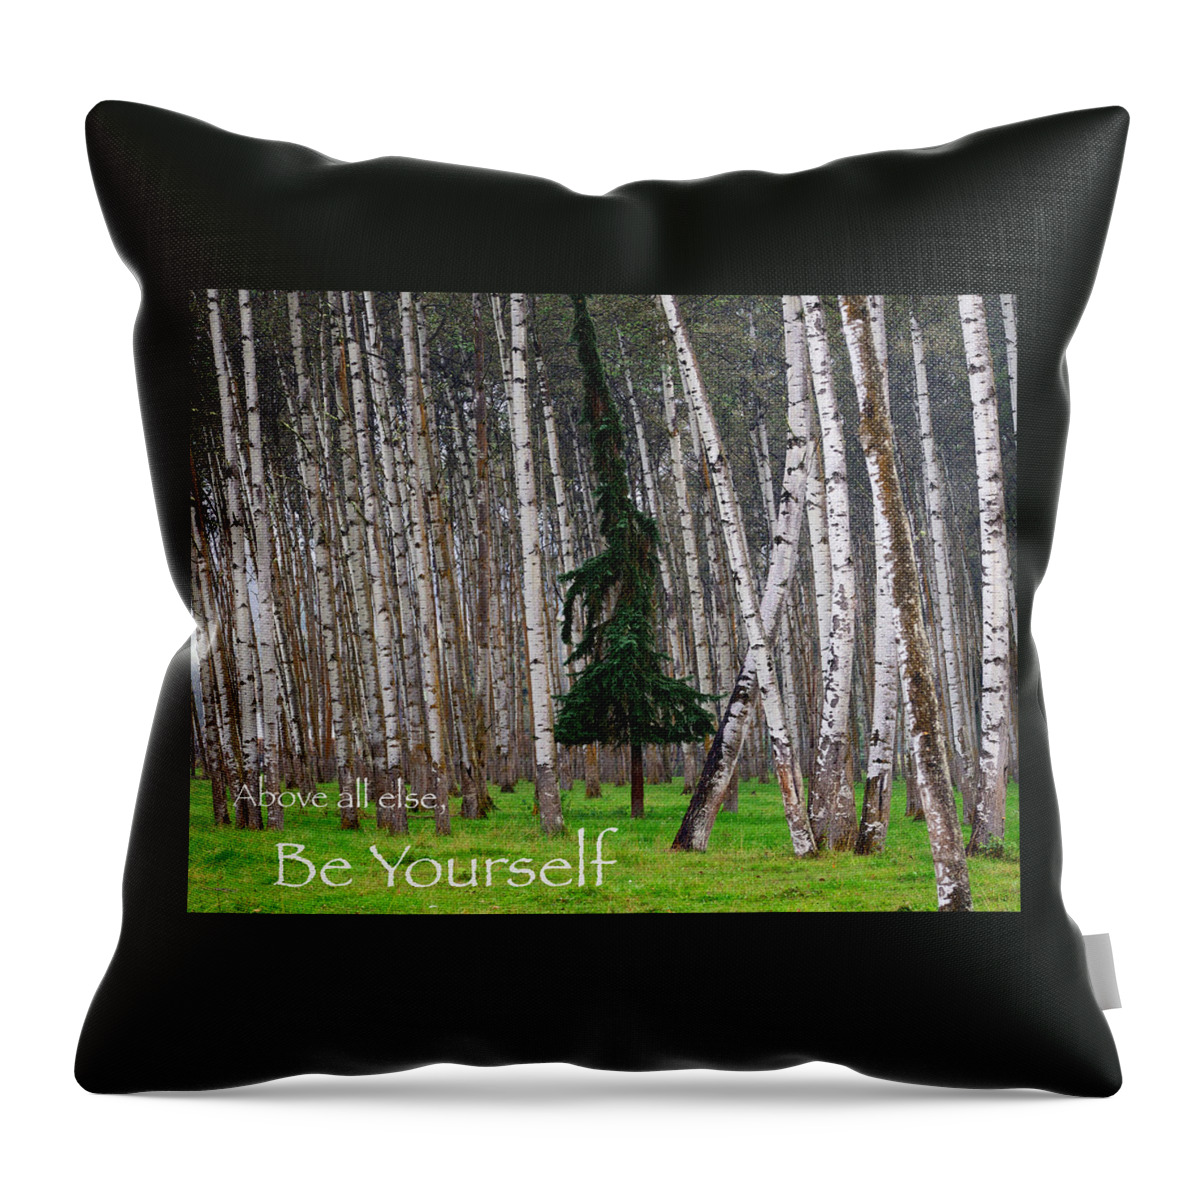 Trees Throw Pillow featuring the photograph Above All Else Be Yourself by Mary Lee Dereske